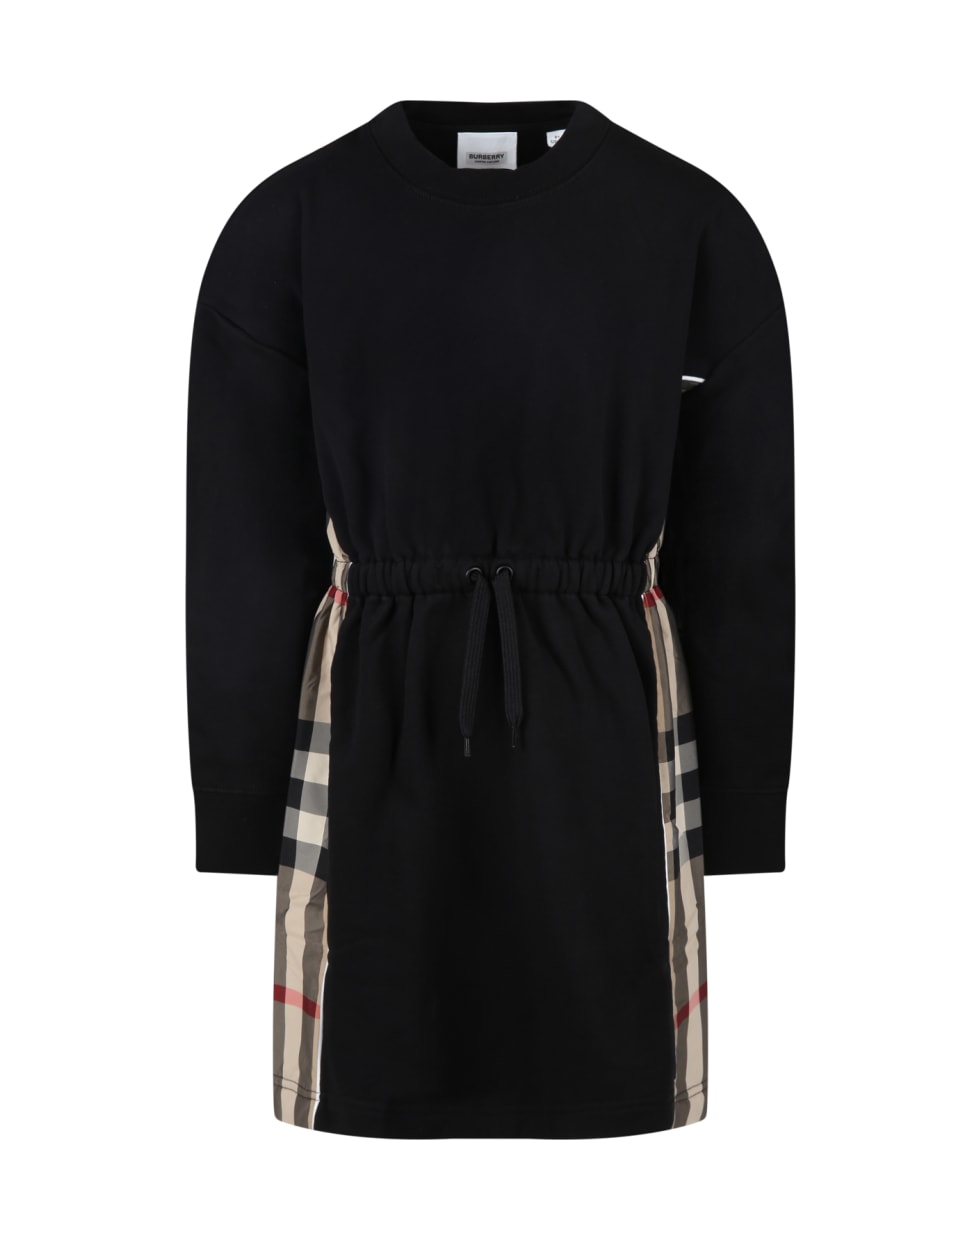 Burberry Black Dress For Girl With Iconic Check Vintage - Black